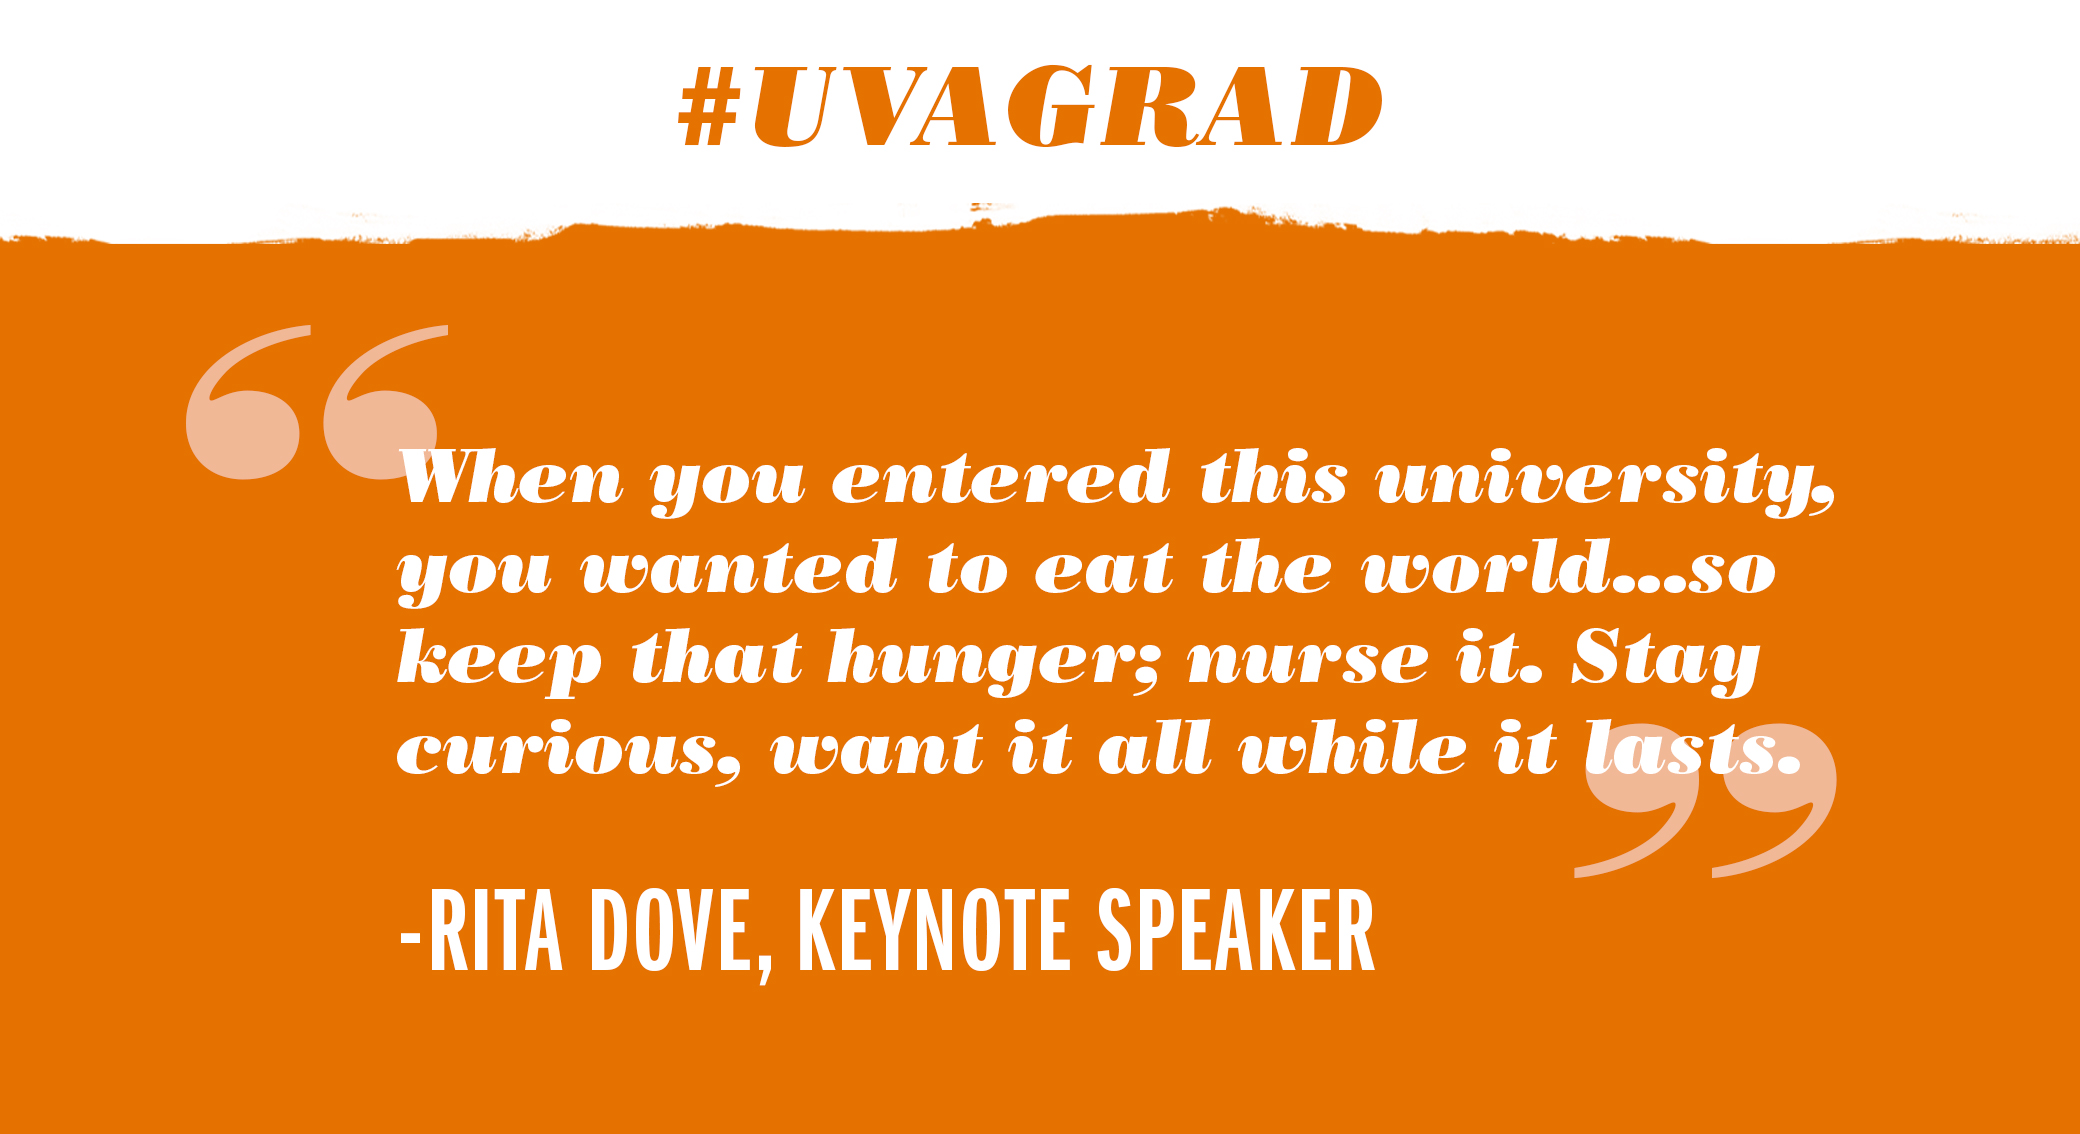 Text reads: #UVAGrad when you entered this university, you wanted to eat the world...so keep that hunger; nurse it.  Stay curious, want it all while it lasts.  Rita Dove, Keynote Speaker